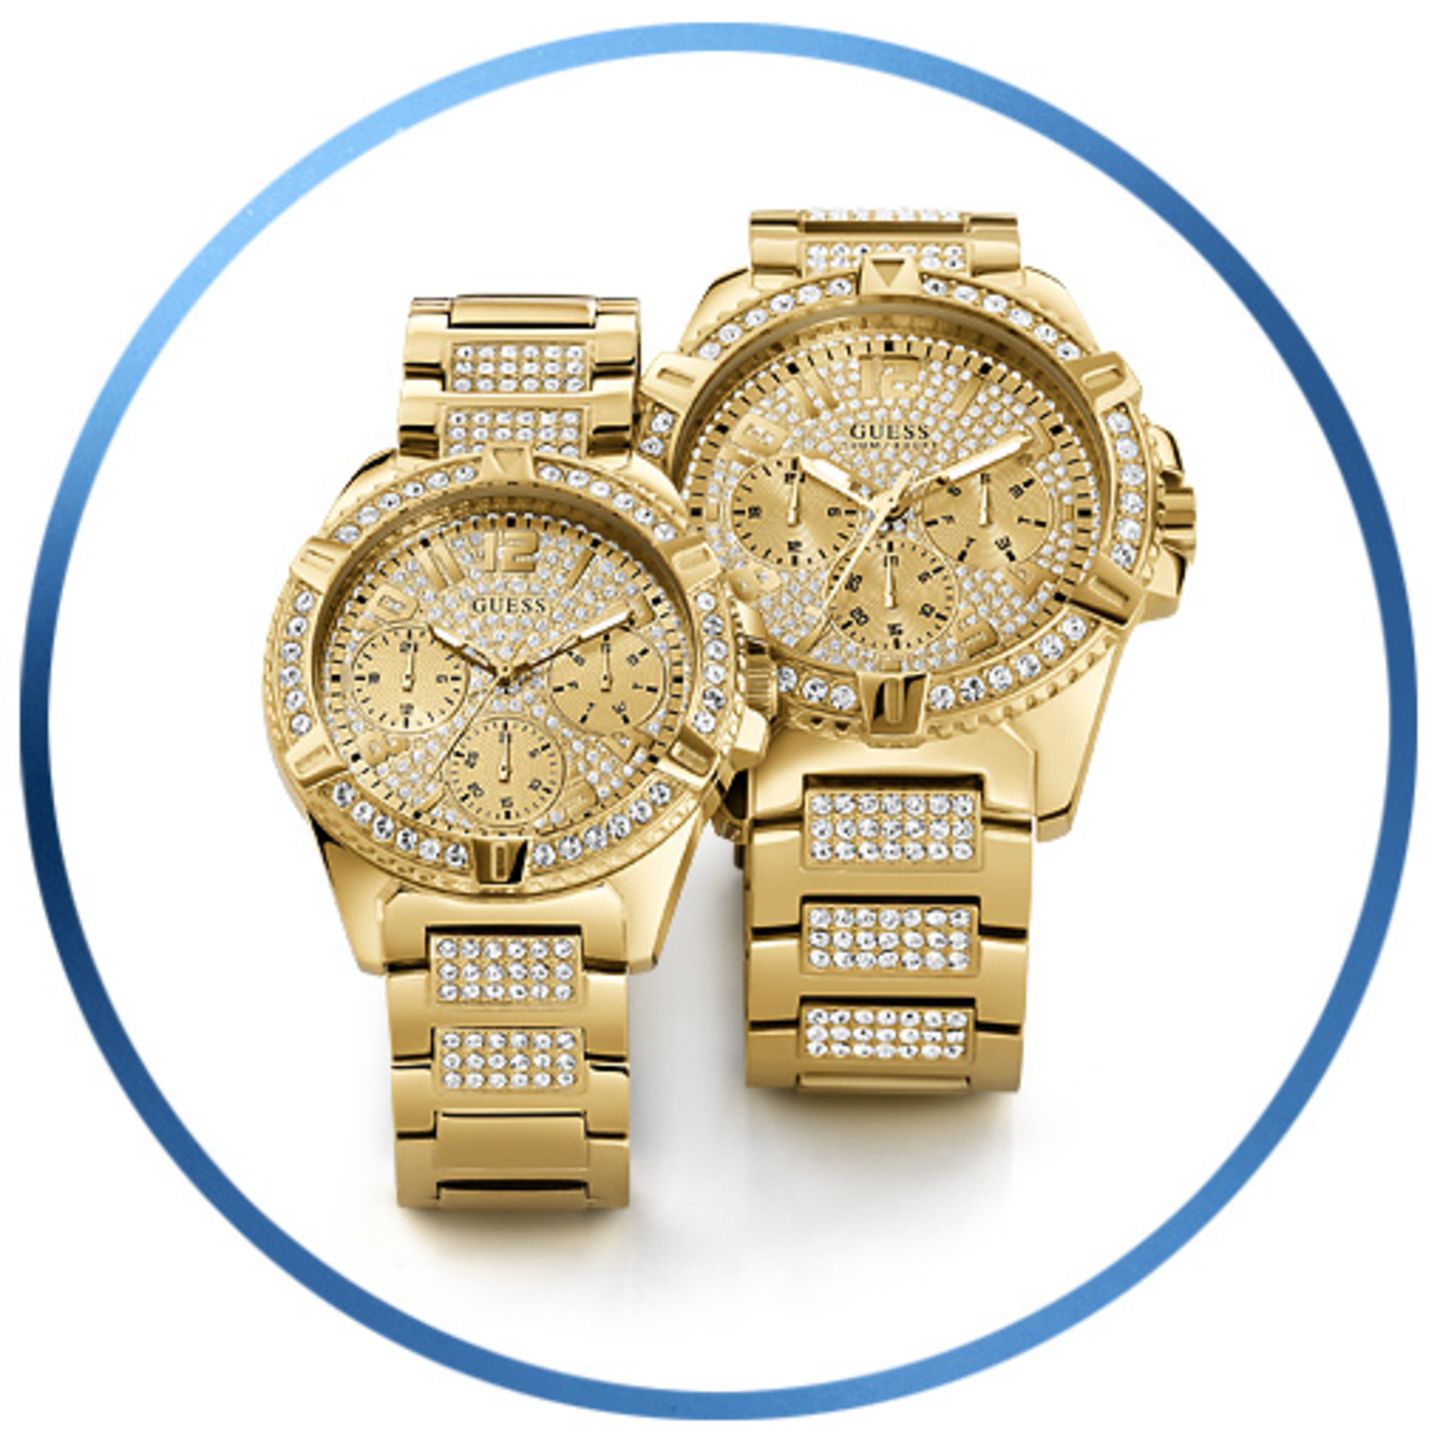 flicker Outlook dynasti guess watch outlet usa,therugbycatalog.com